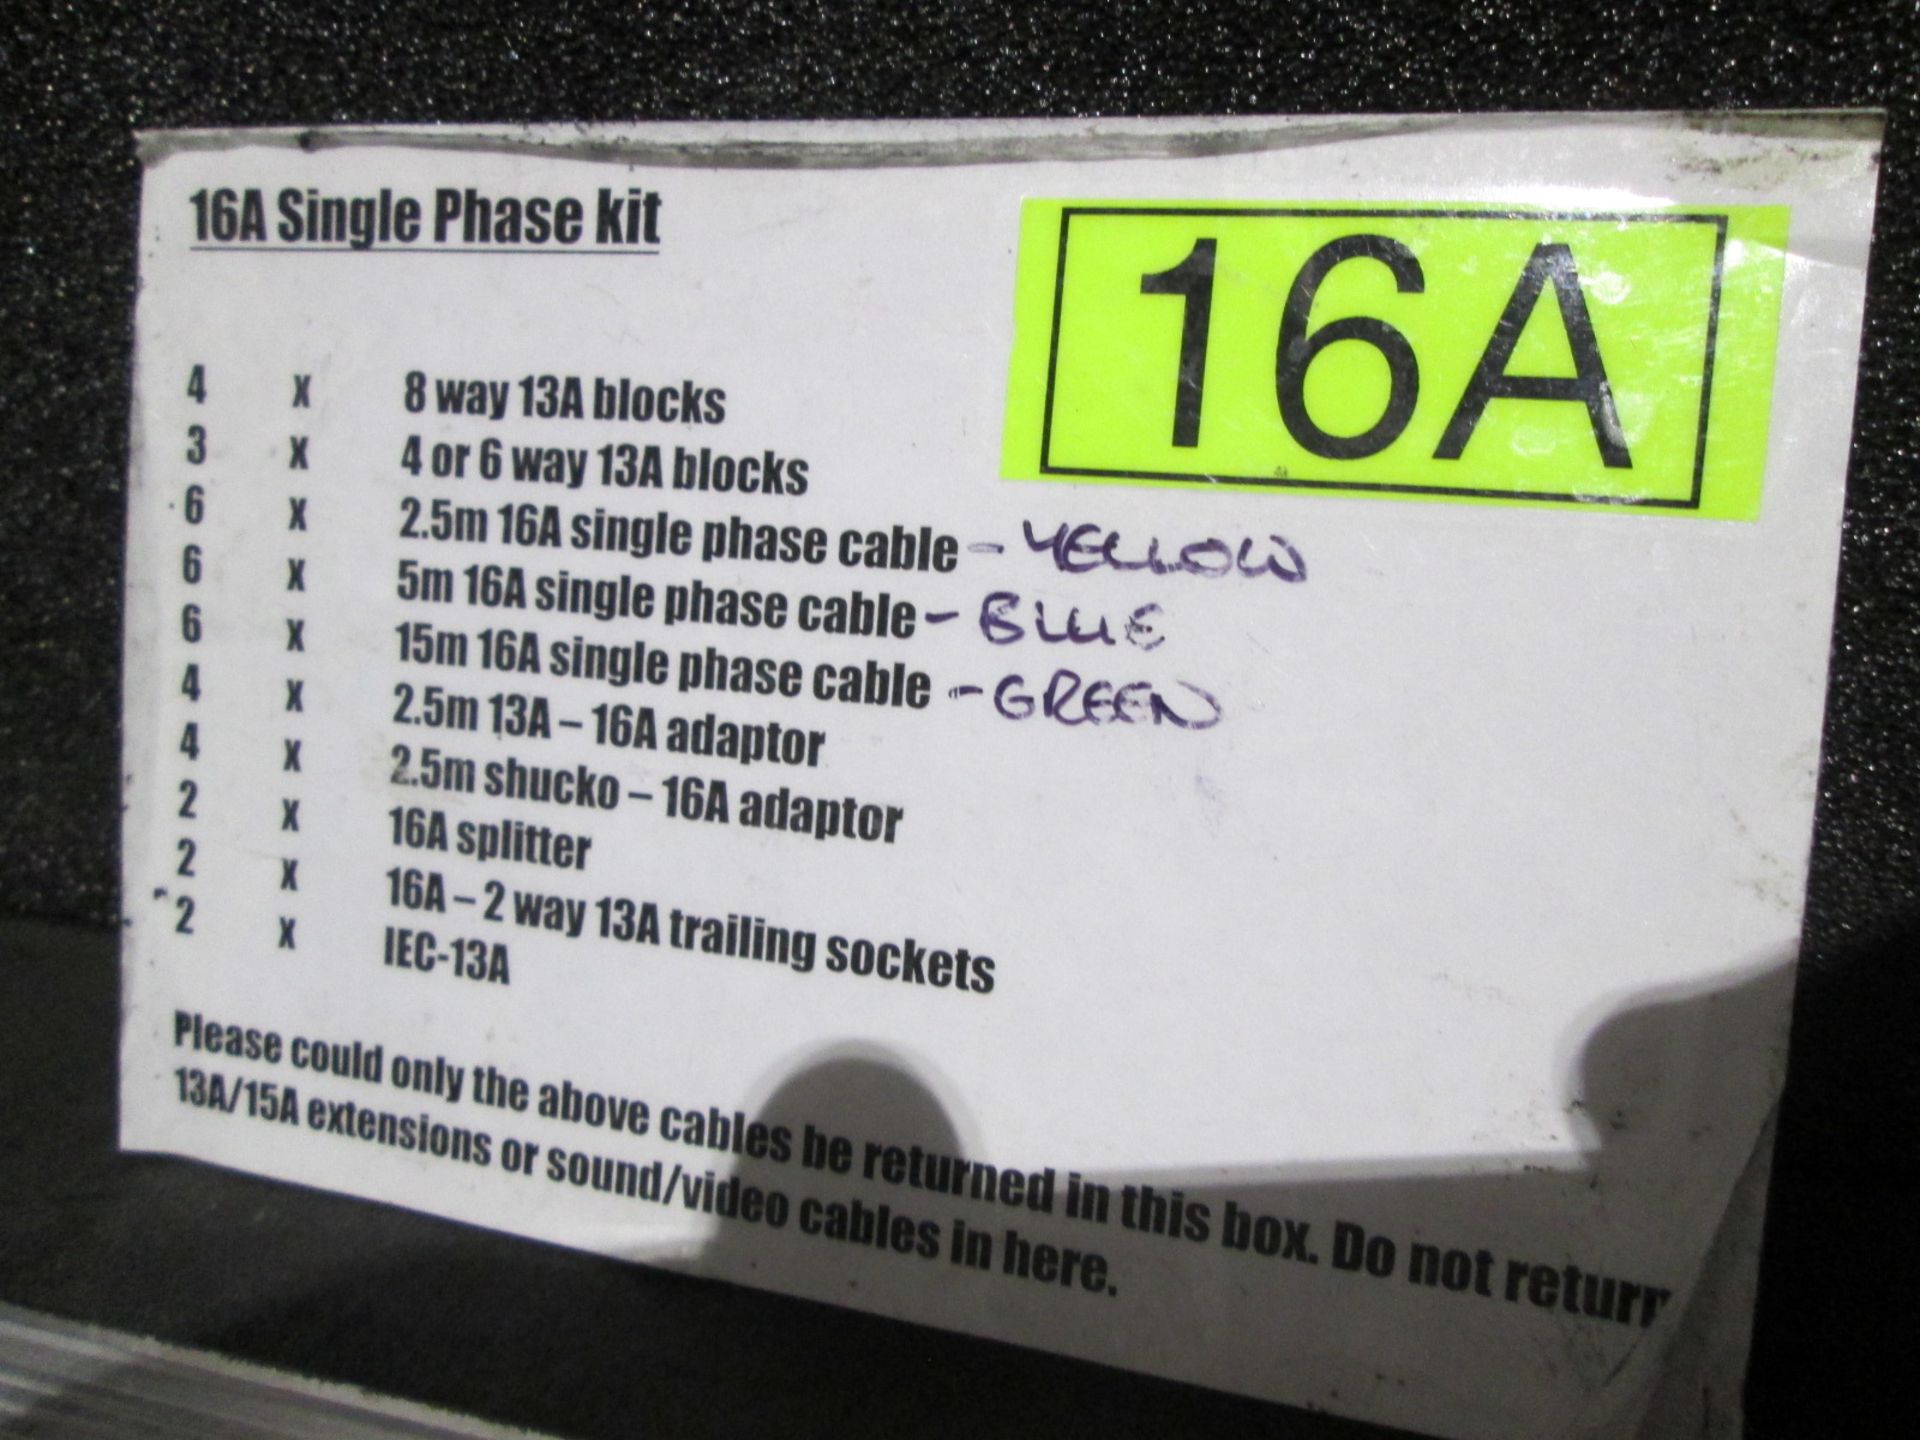 16Amp Single Phase Kit, to include 4 x 8 way blocks, 3 x 4 or 6 way 13A blocks, 6 x 2.5 metre 16A - Image 4 of 5